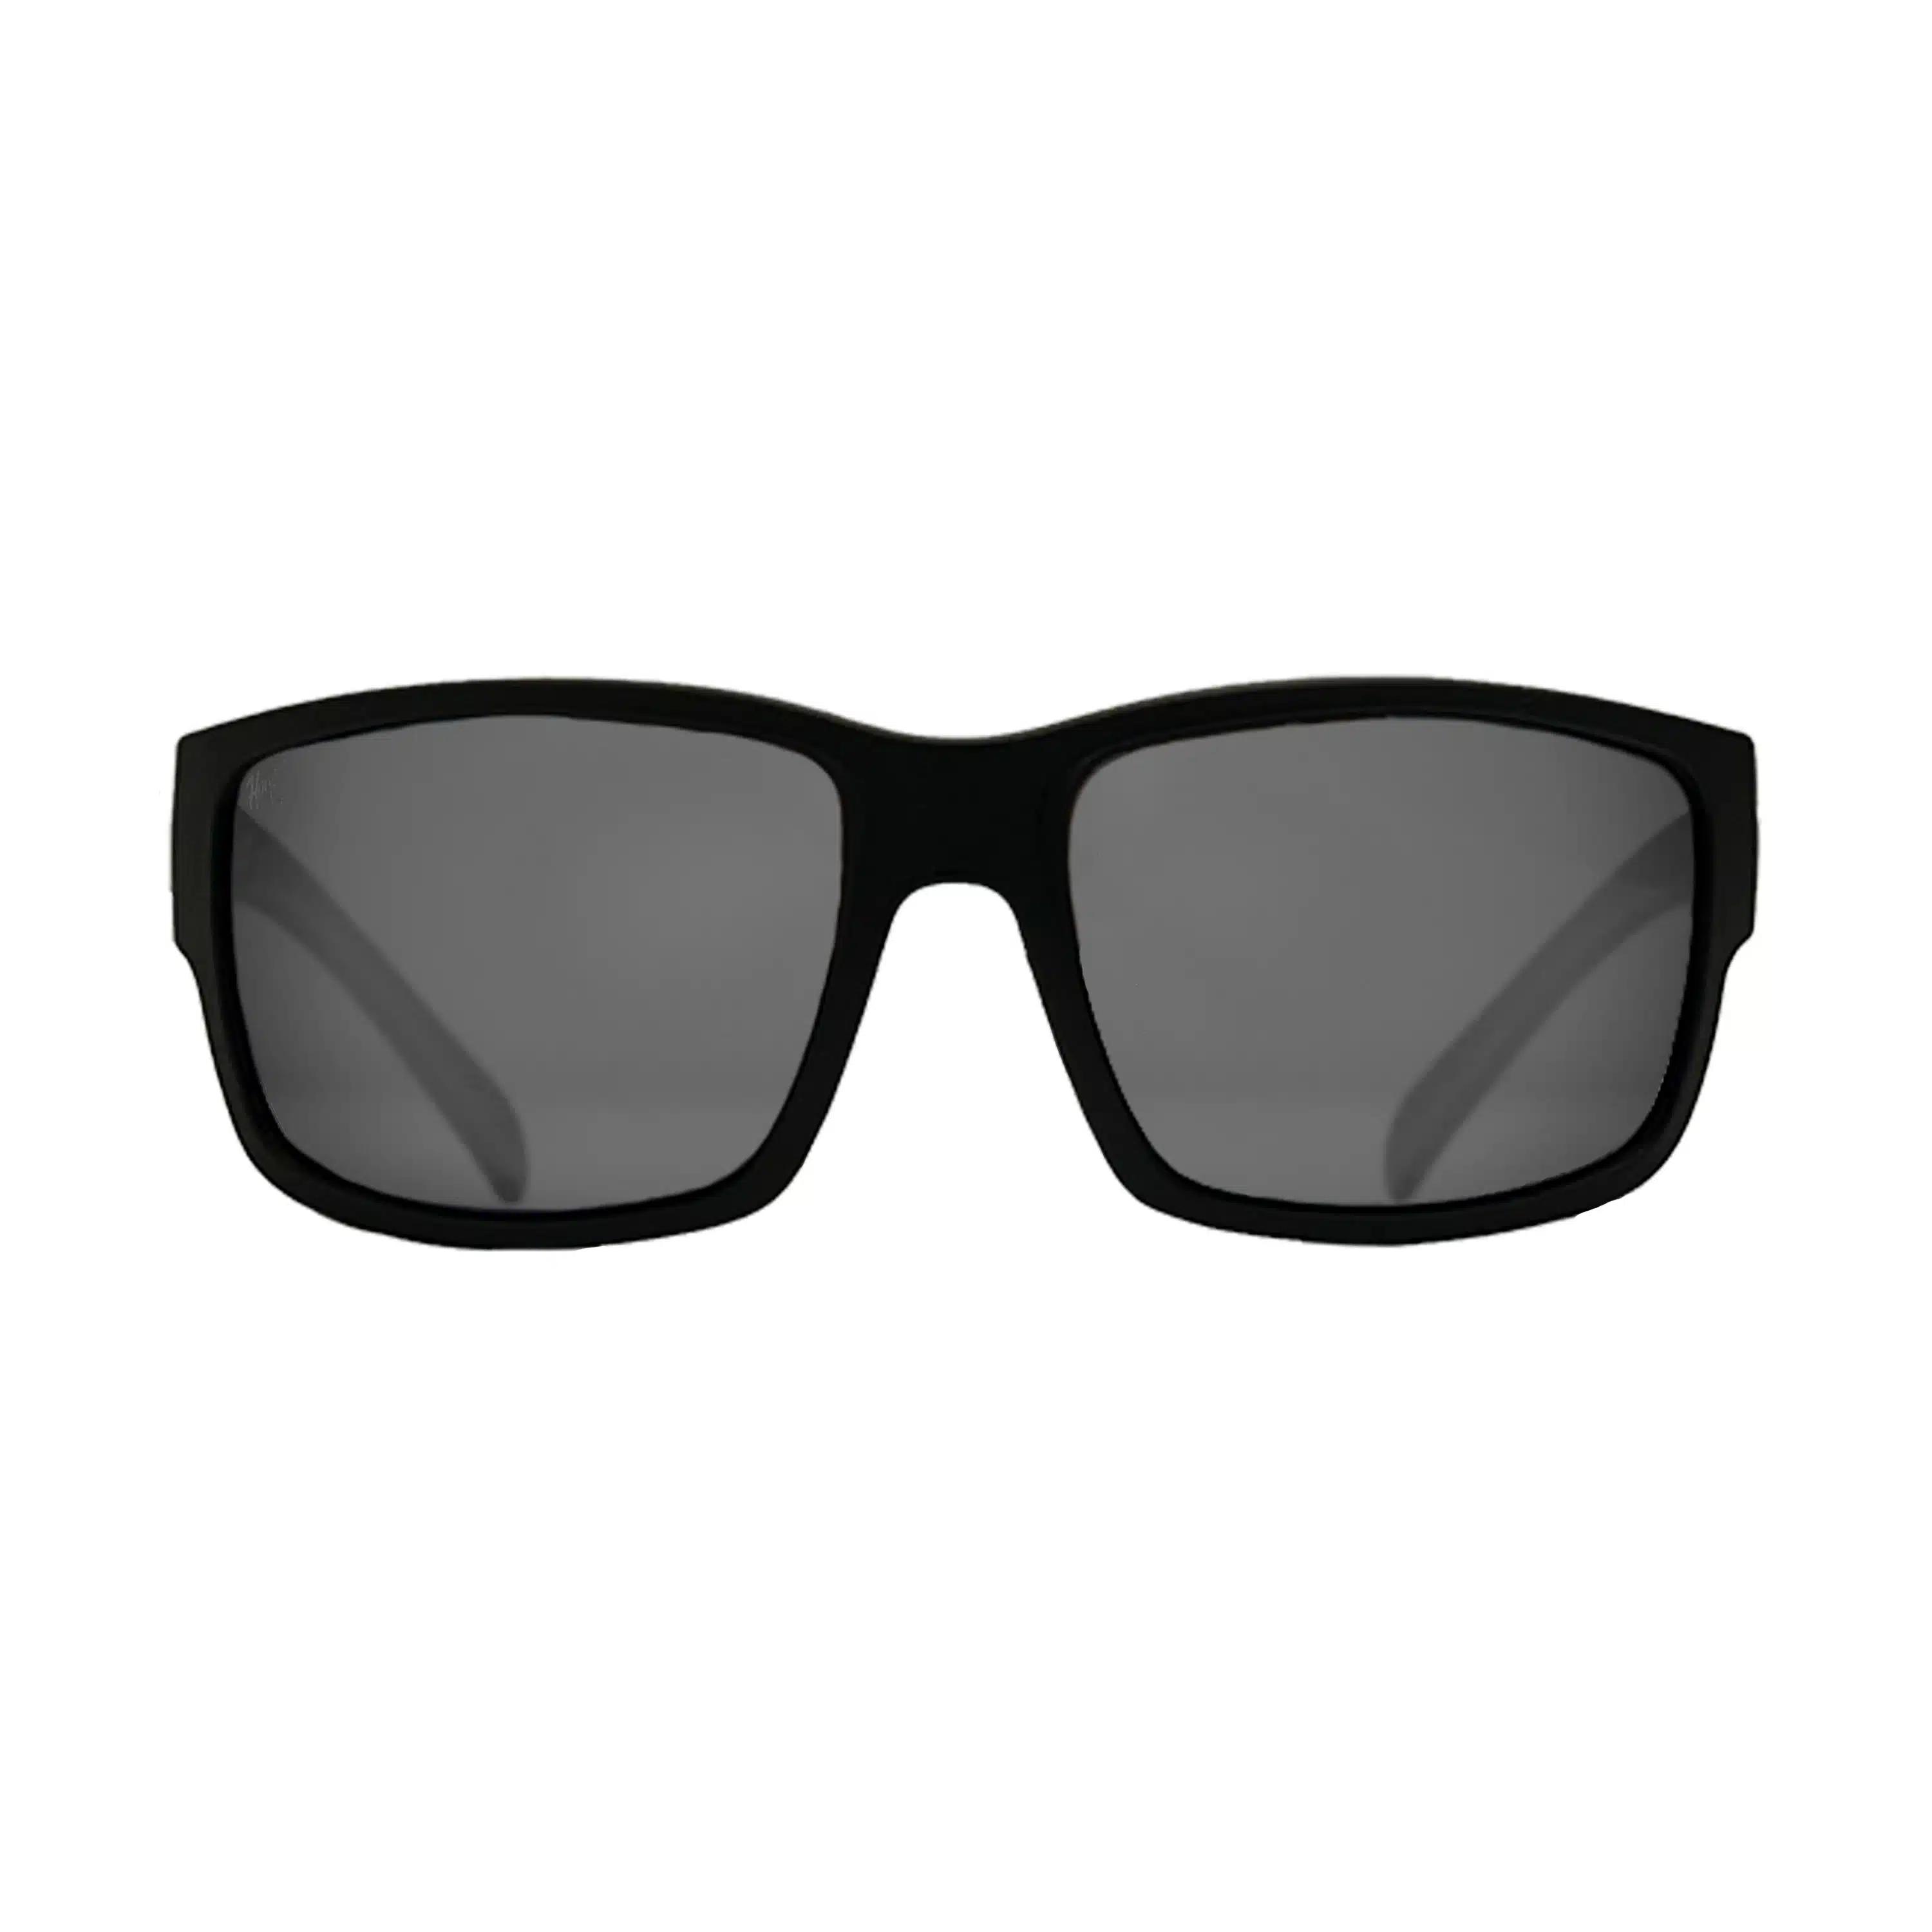 best sunglasses for daily use. Fits most faces | Polarized Sunglasses